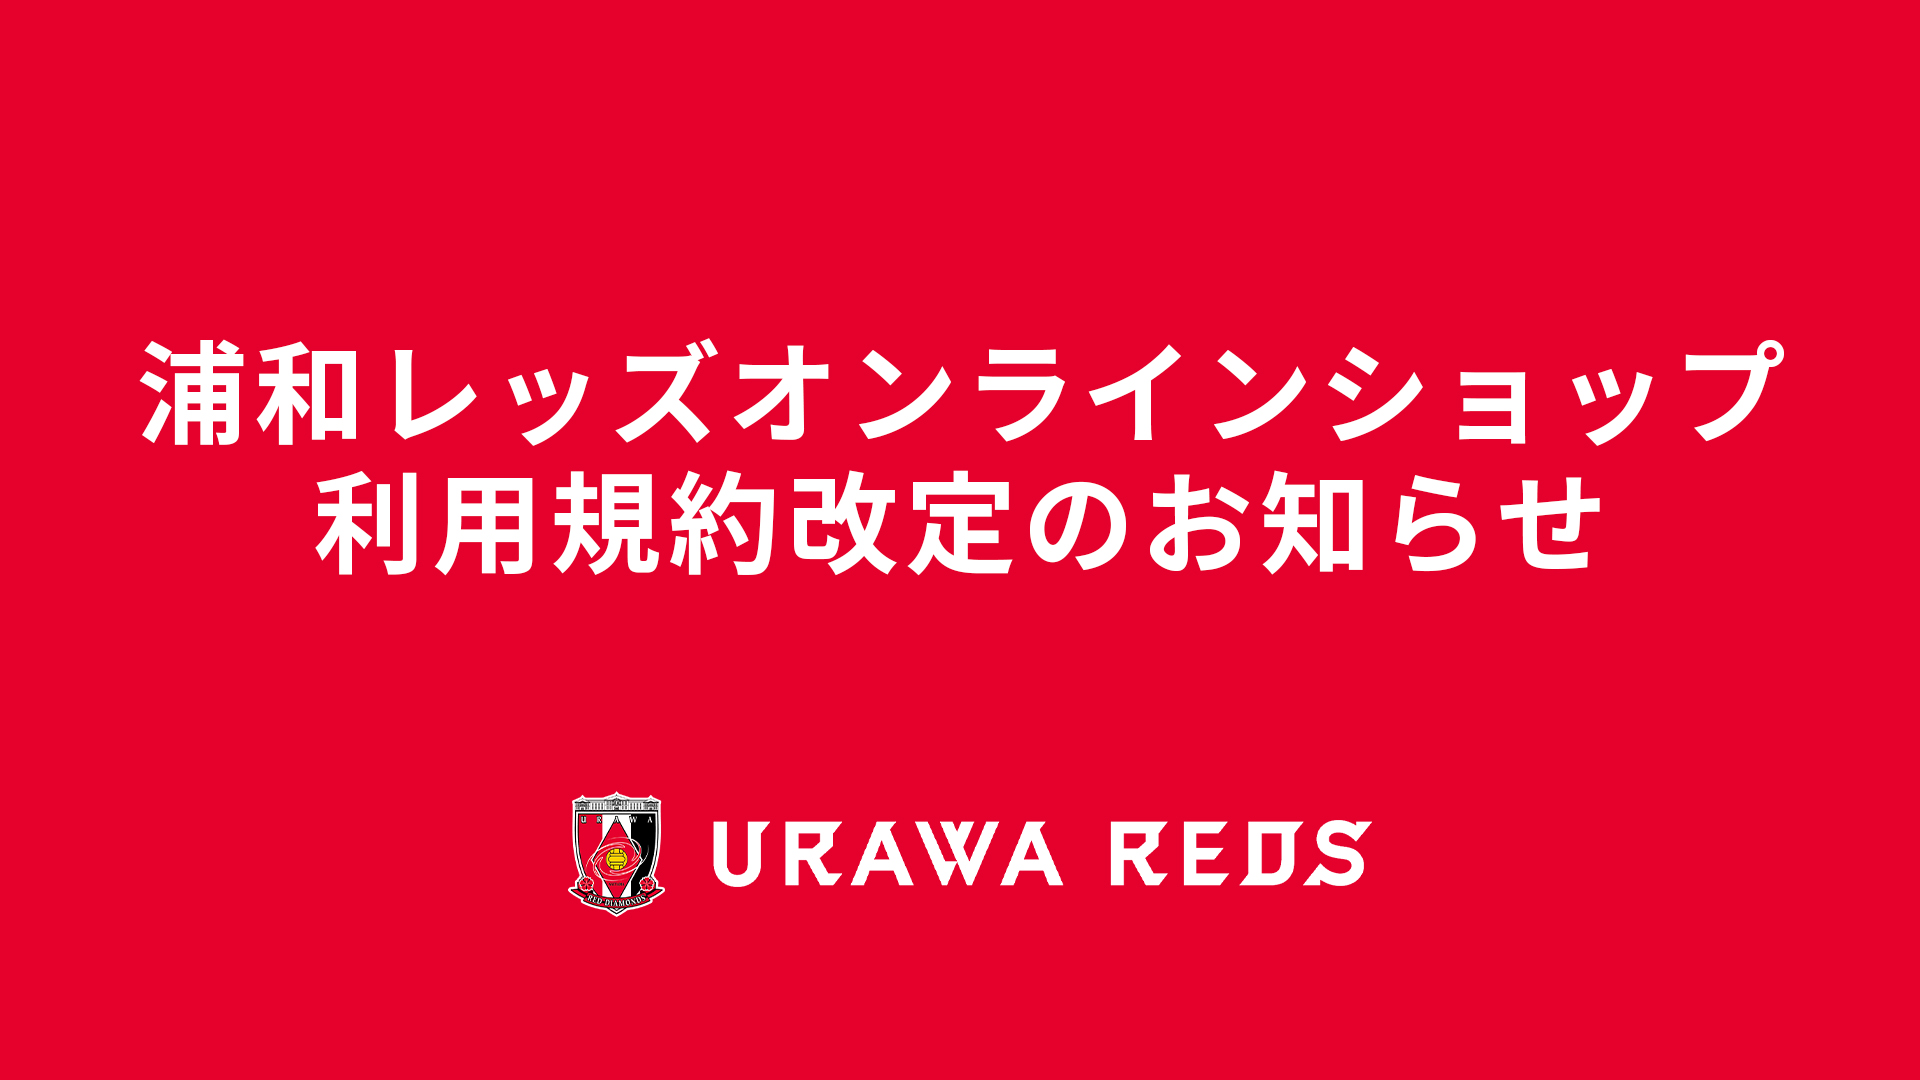 Urawa Reds Online Shop Terms of Use Change Notice